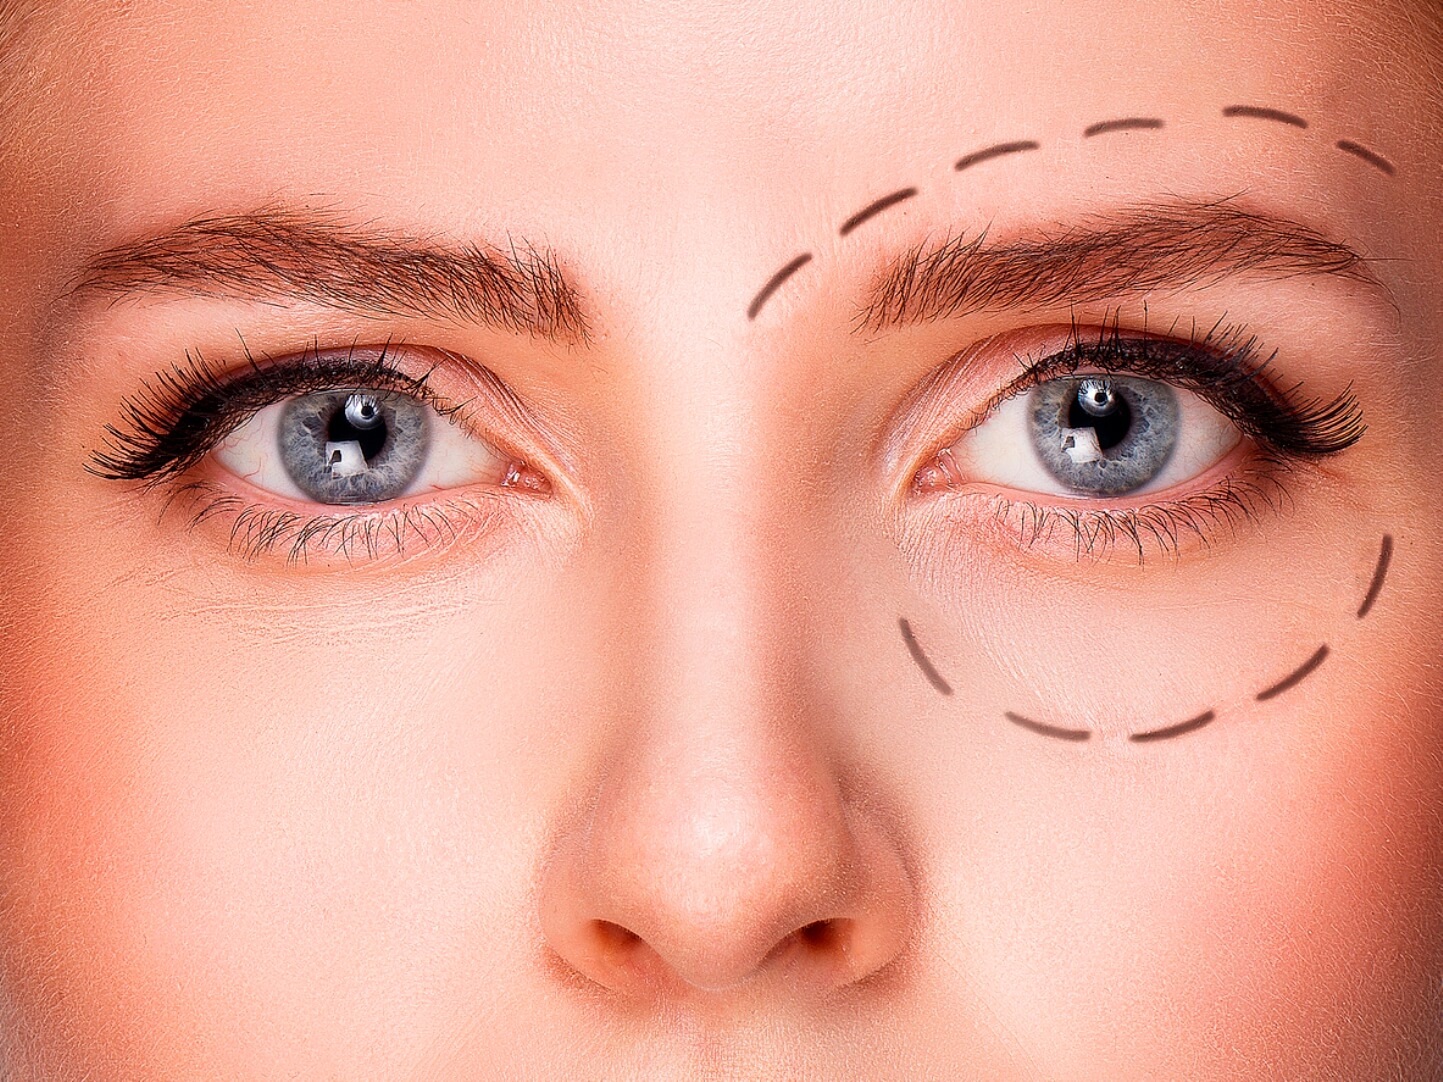 Things You Need To Know About Drooping Eyelids